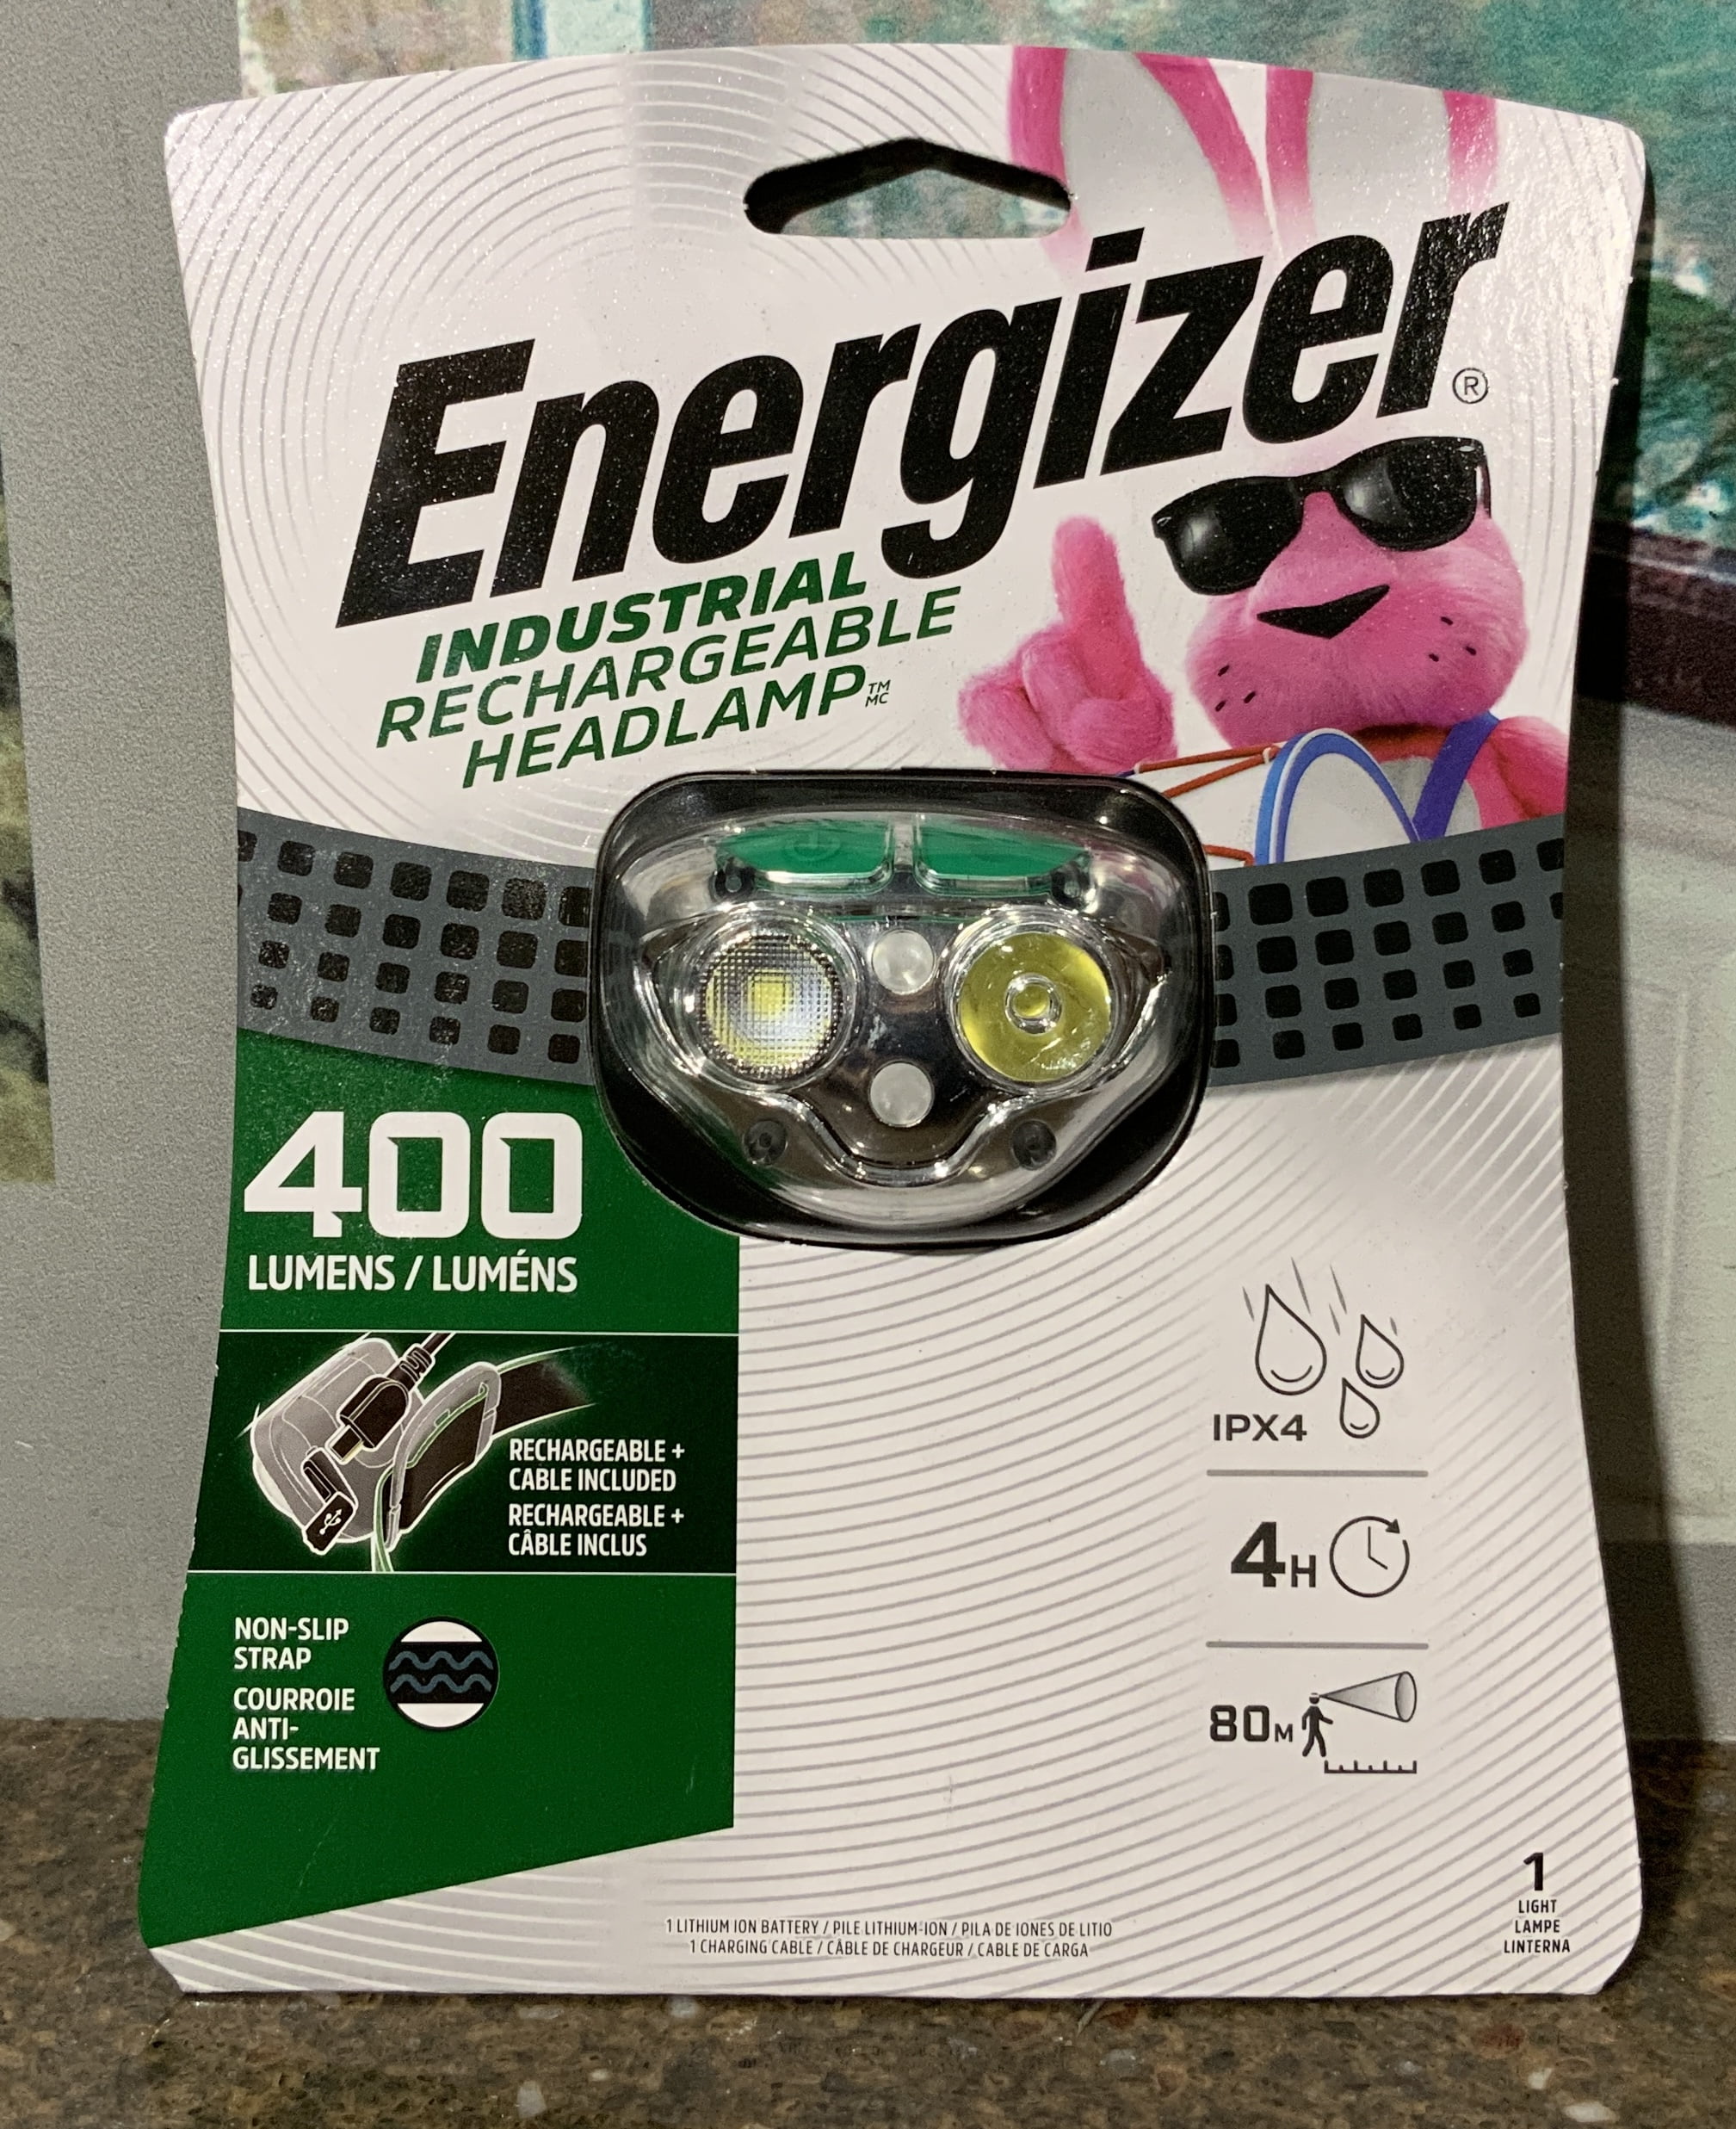 Energizer Industrial Lumens Hour Rechargeable Headlamp 400 80m 4 Visibility IPX4